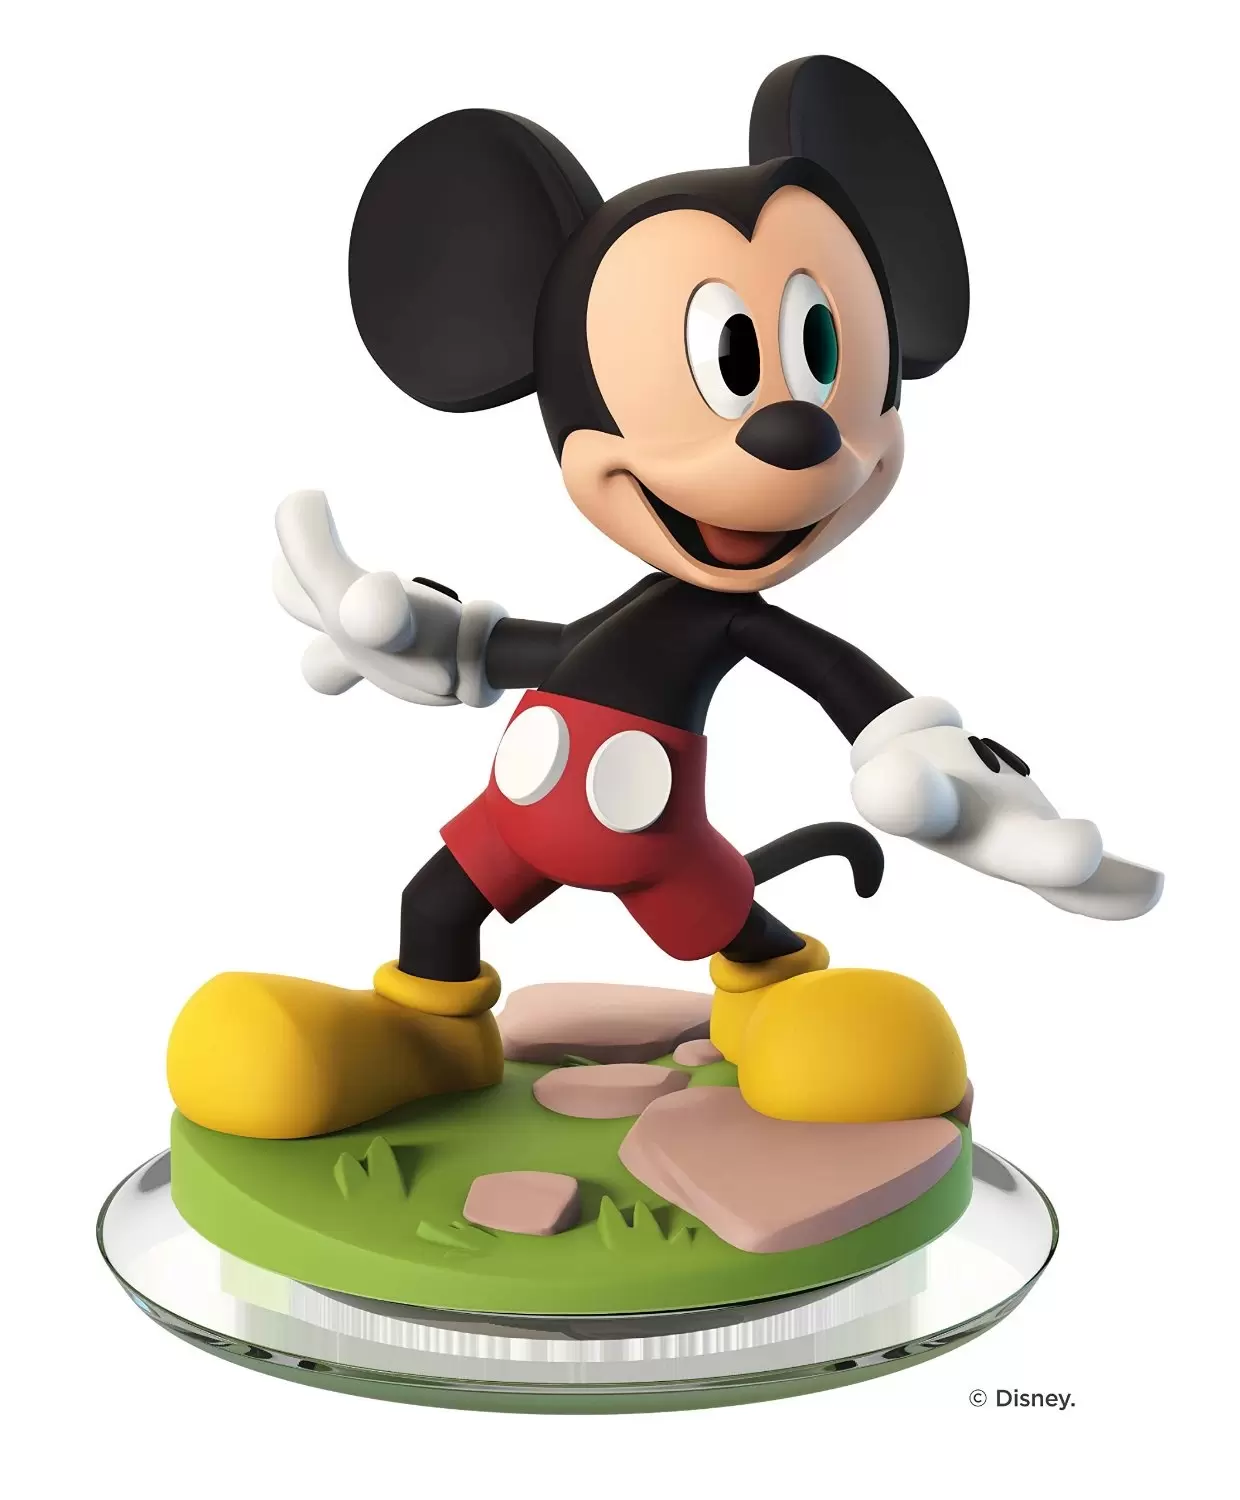 Disney Infinity Action figures - Mickey Mouse